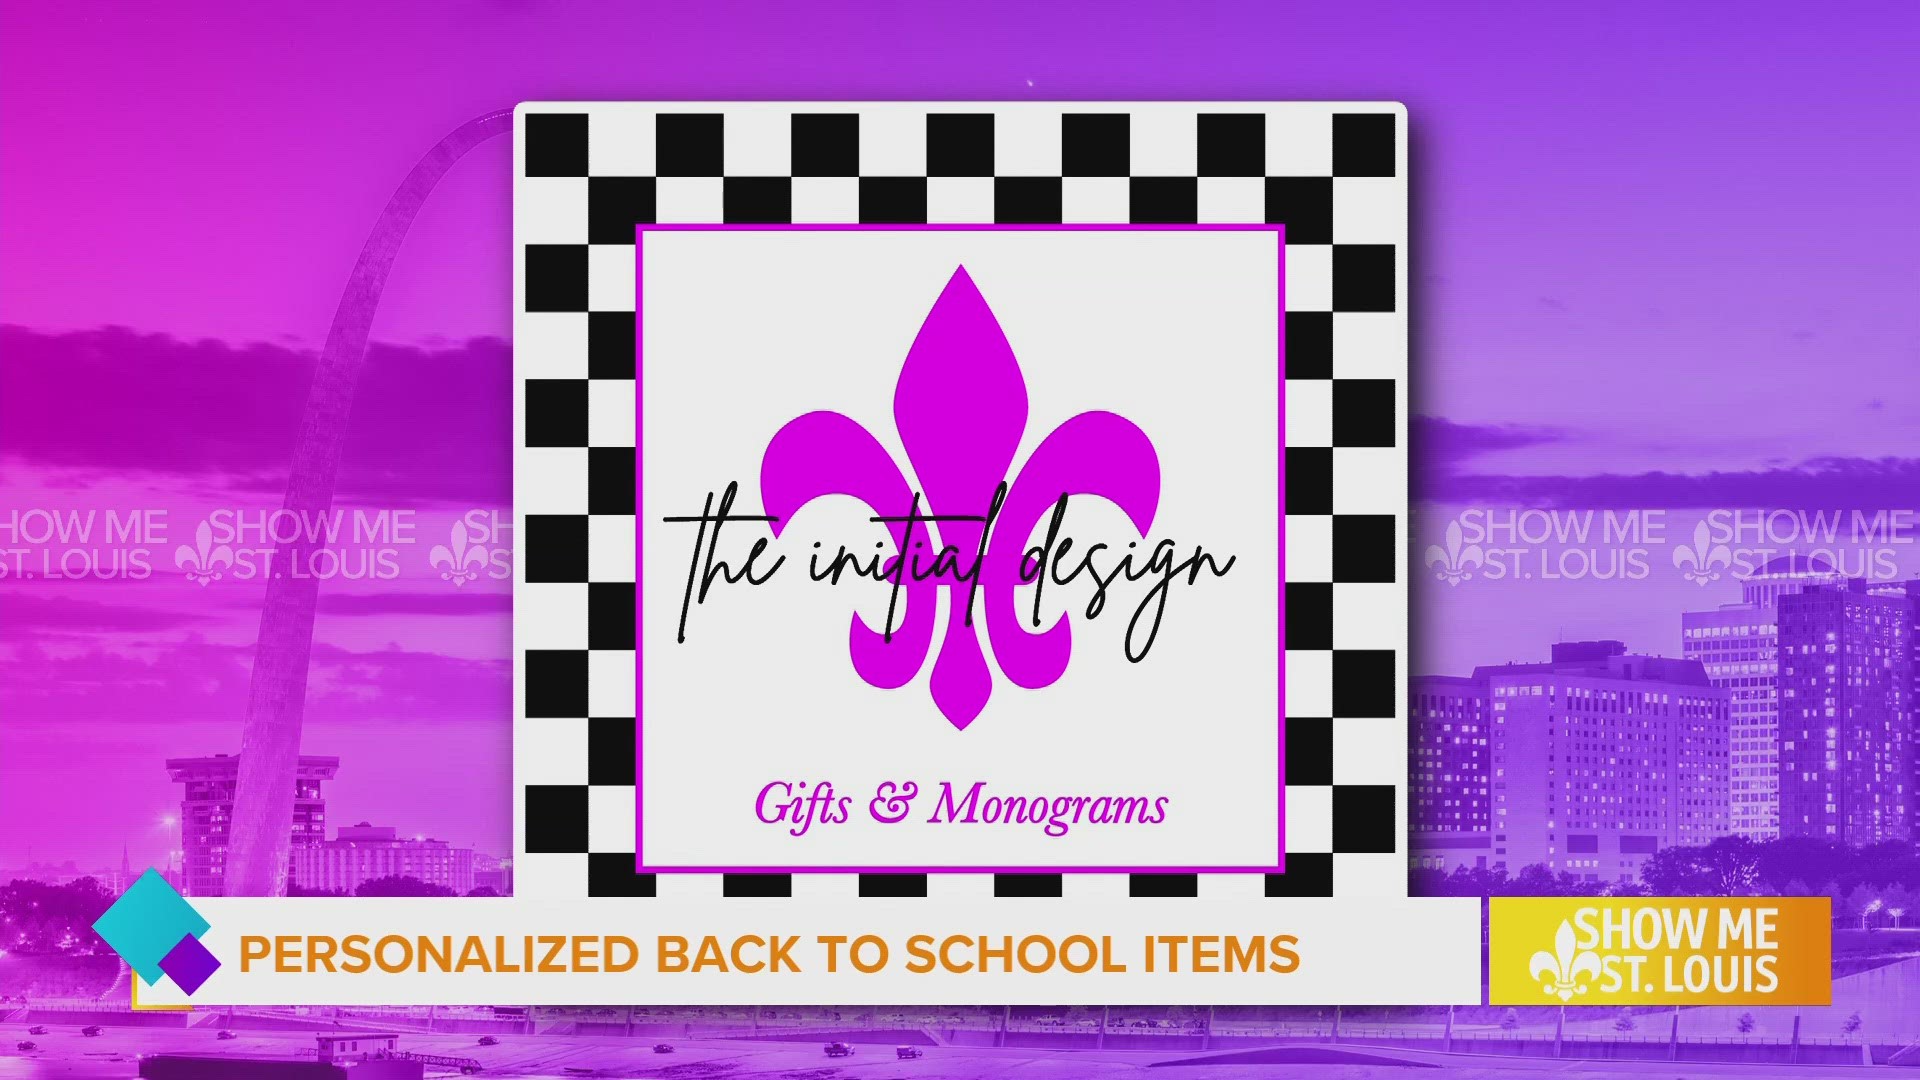 Personalize your Purchase: Monogramming & More